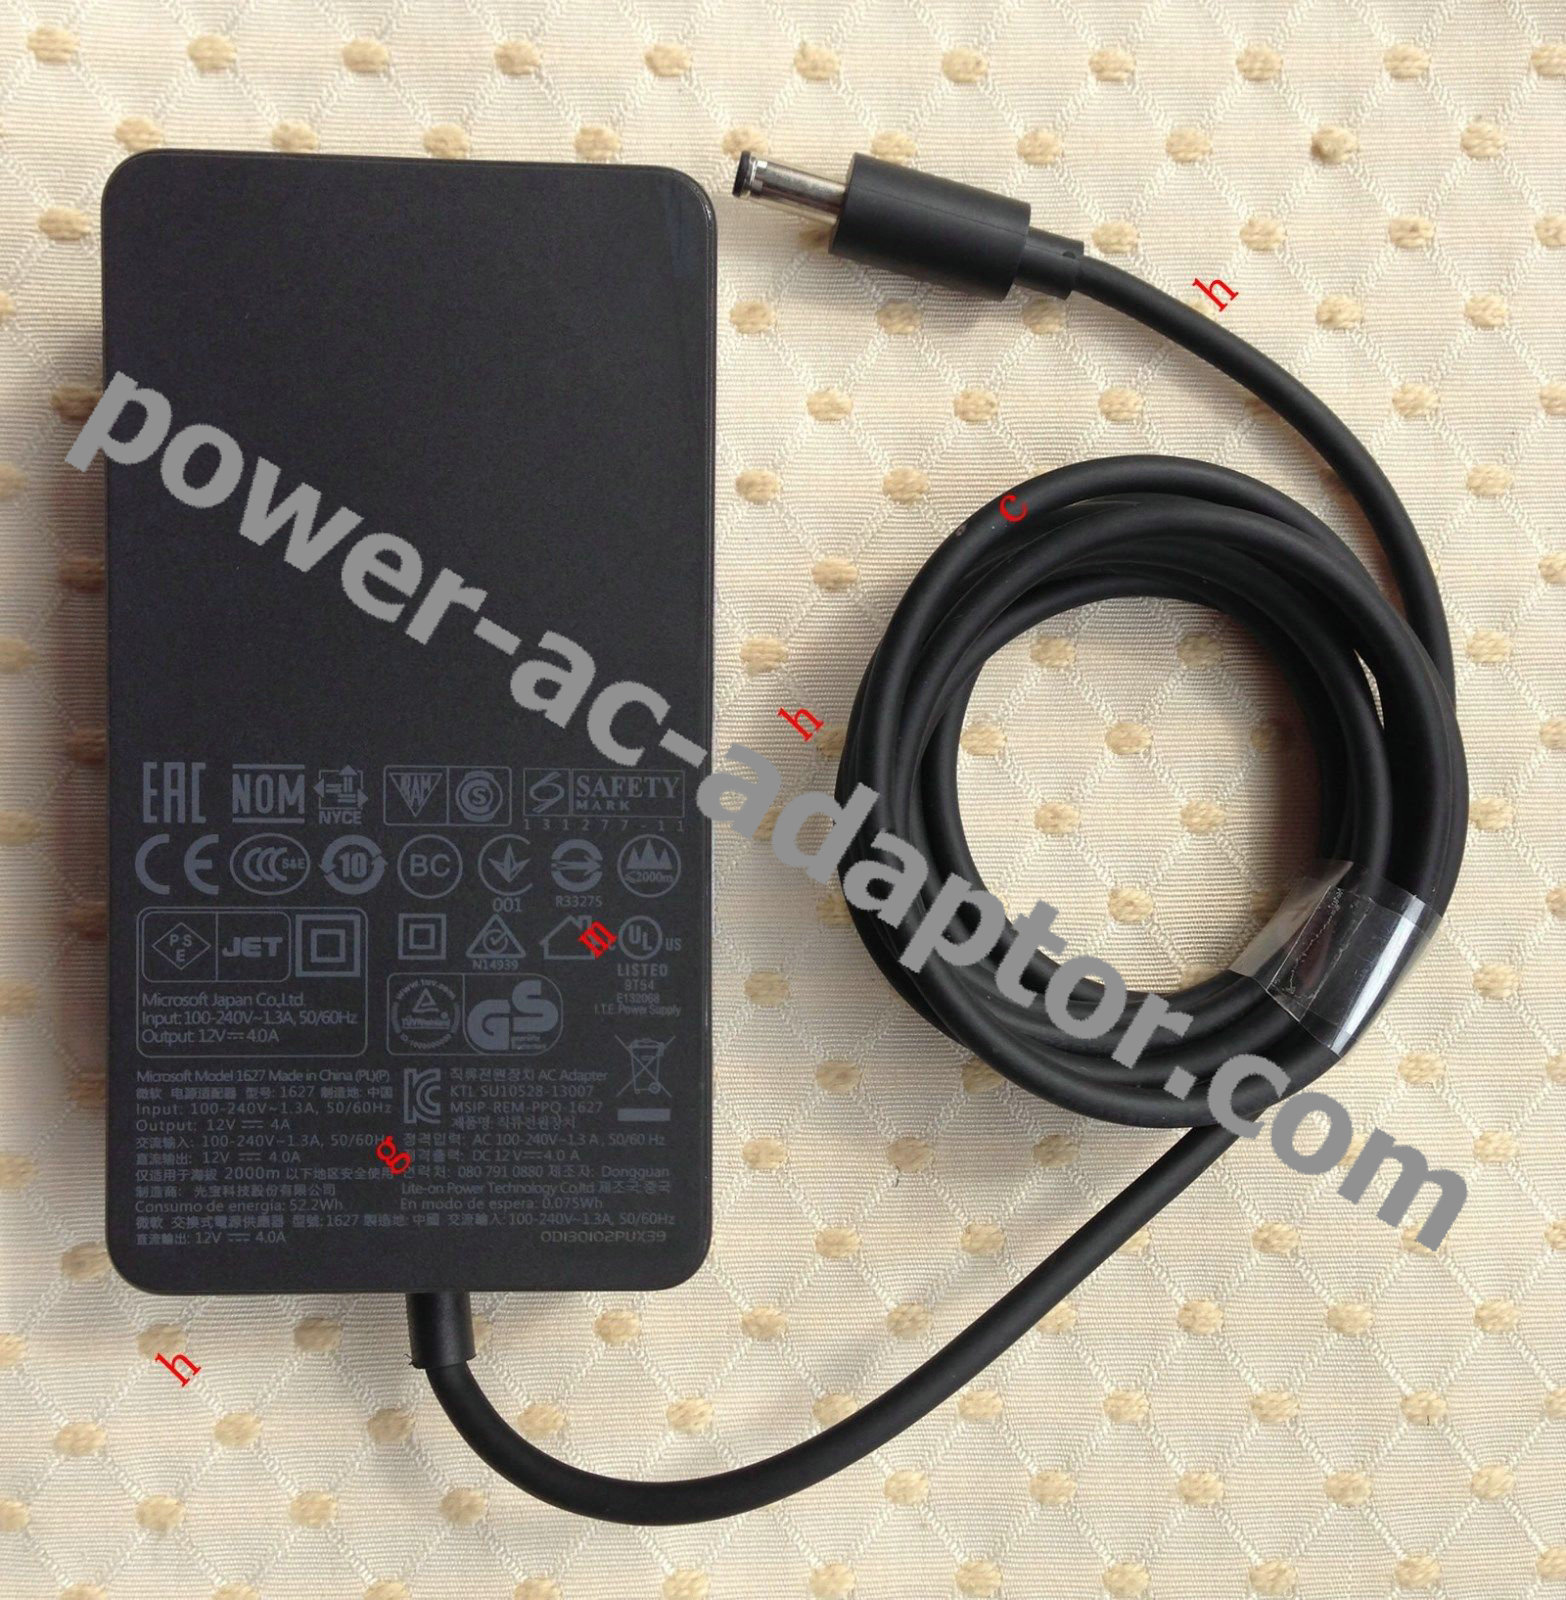 Microsoft 48W AC Adapte for Surface Pro 3,MW6-00001 Docking Stat